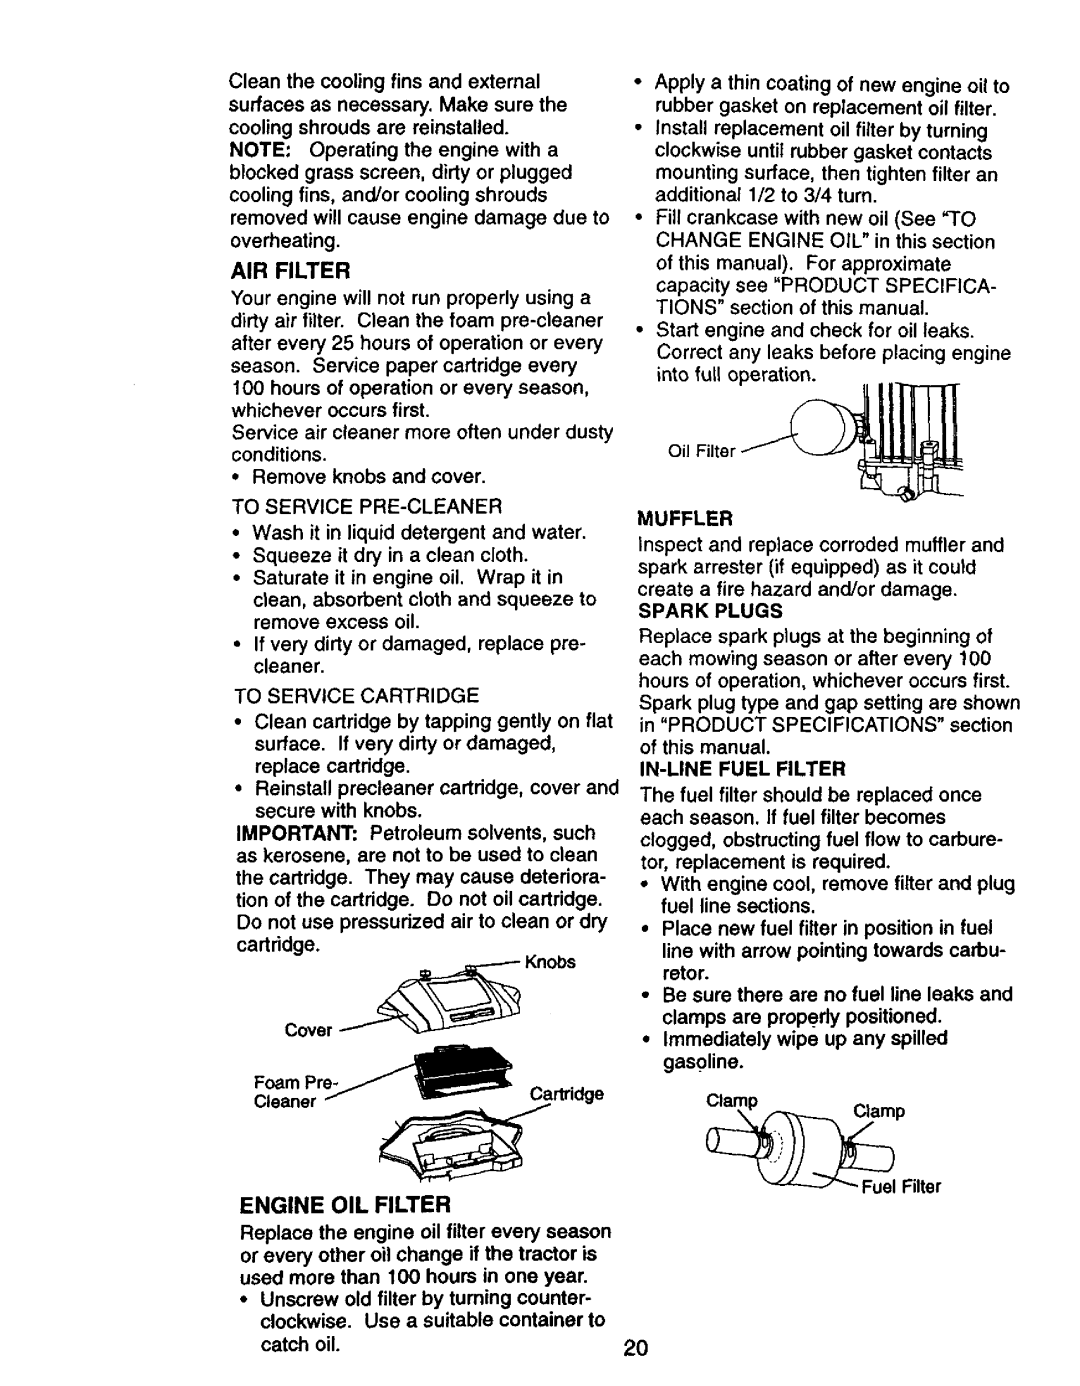 Craftsman 917.27075 owner manual Engine Oil Filter, Air Filter, CleanerCartridge 